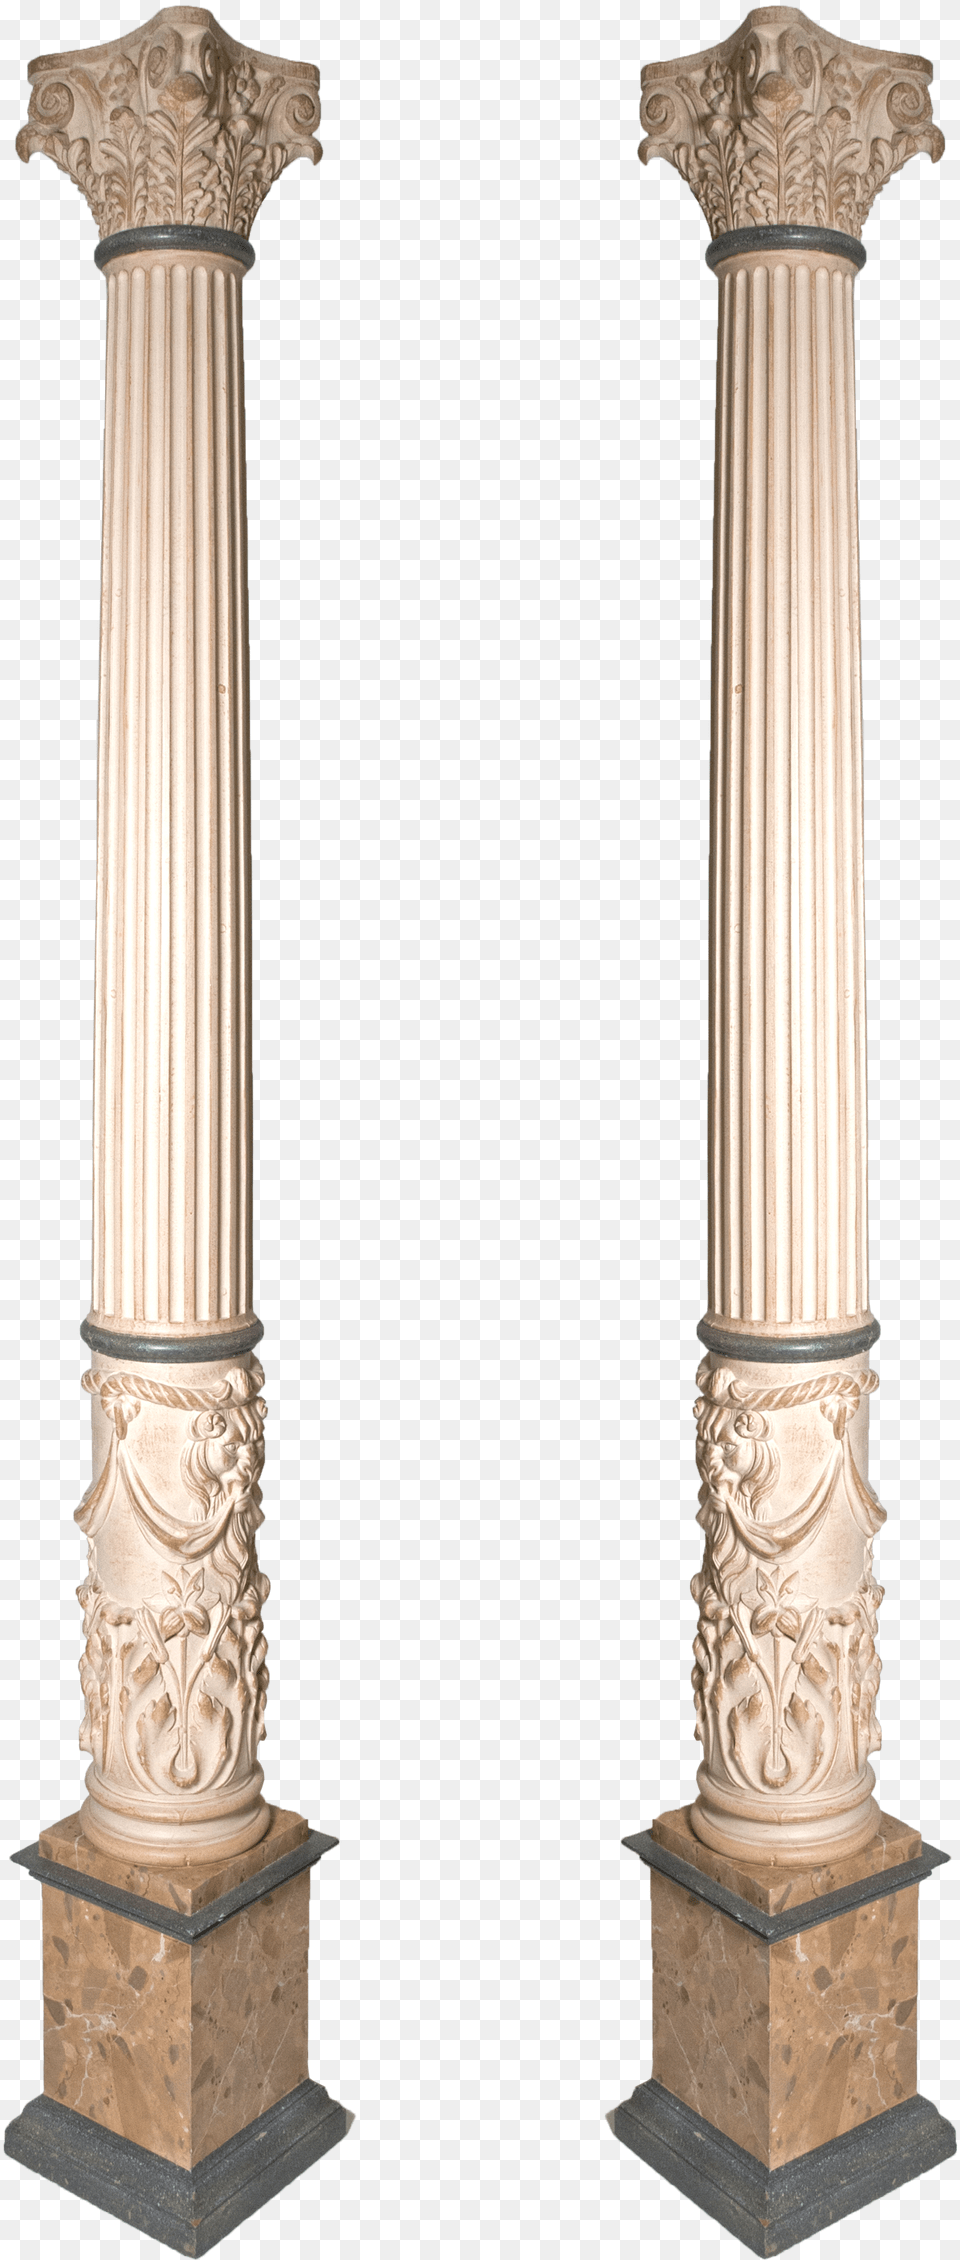 Wooden Pillar Picture Architecture Free Png